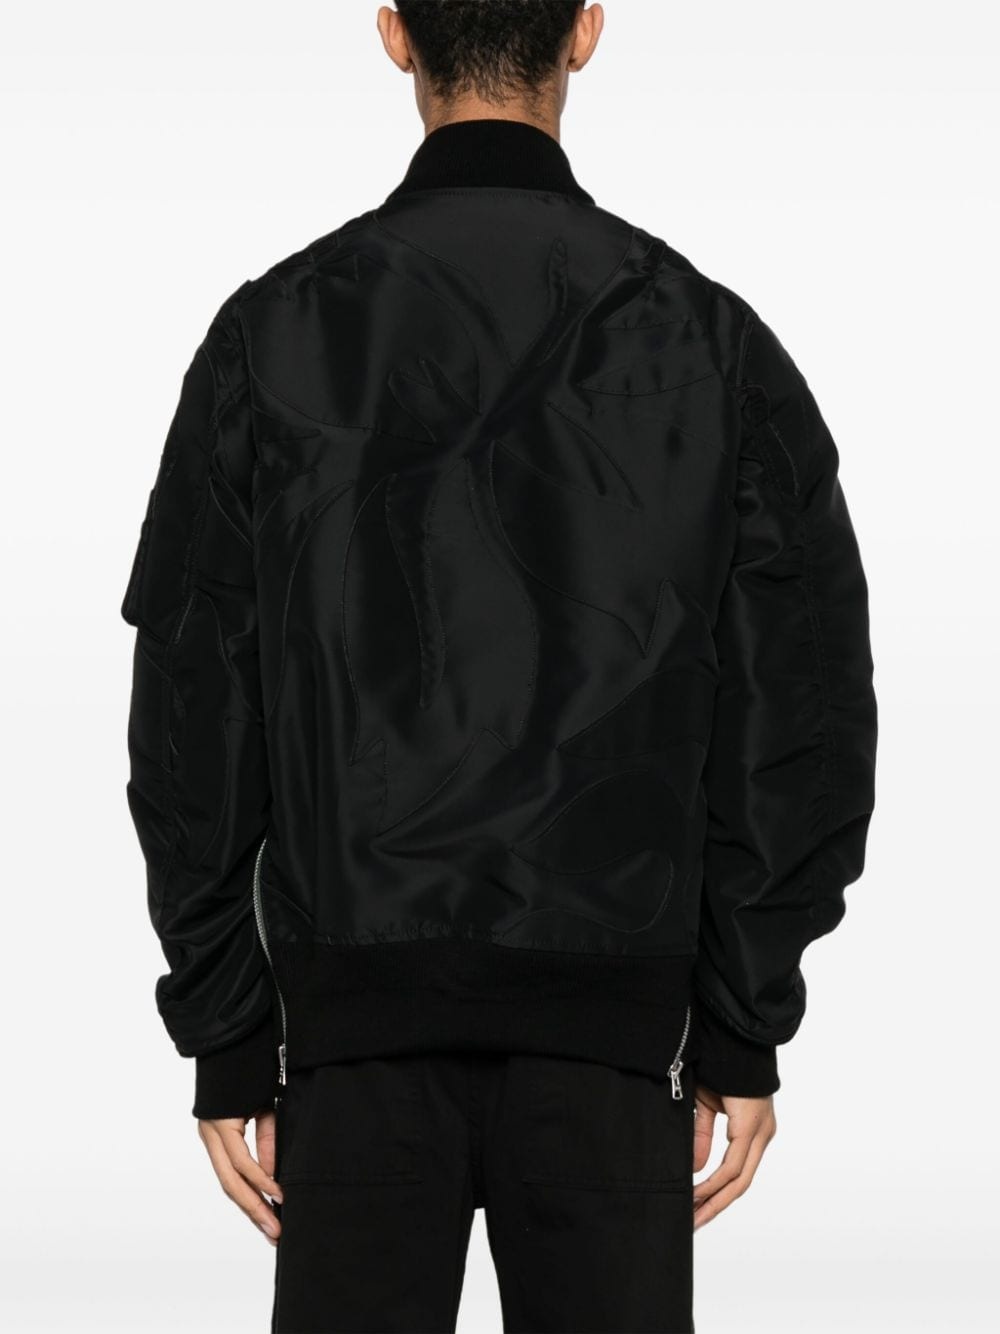 embroidered-patch bomber jacket - 4